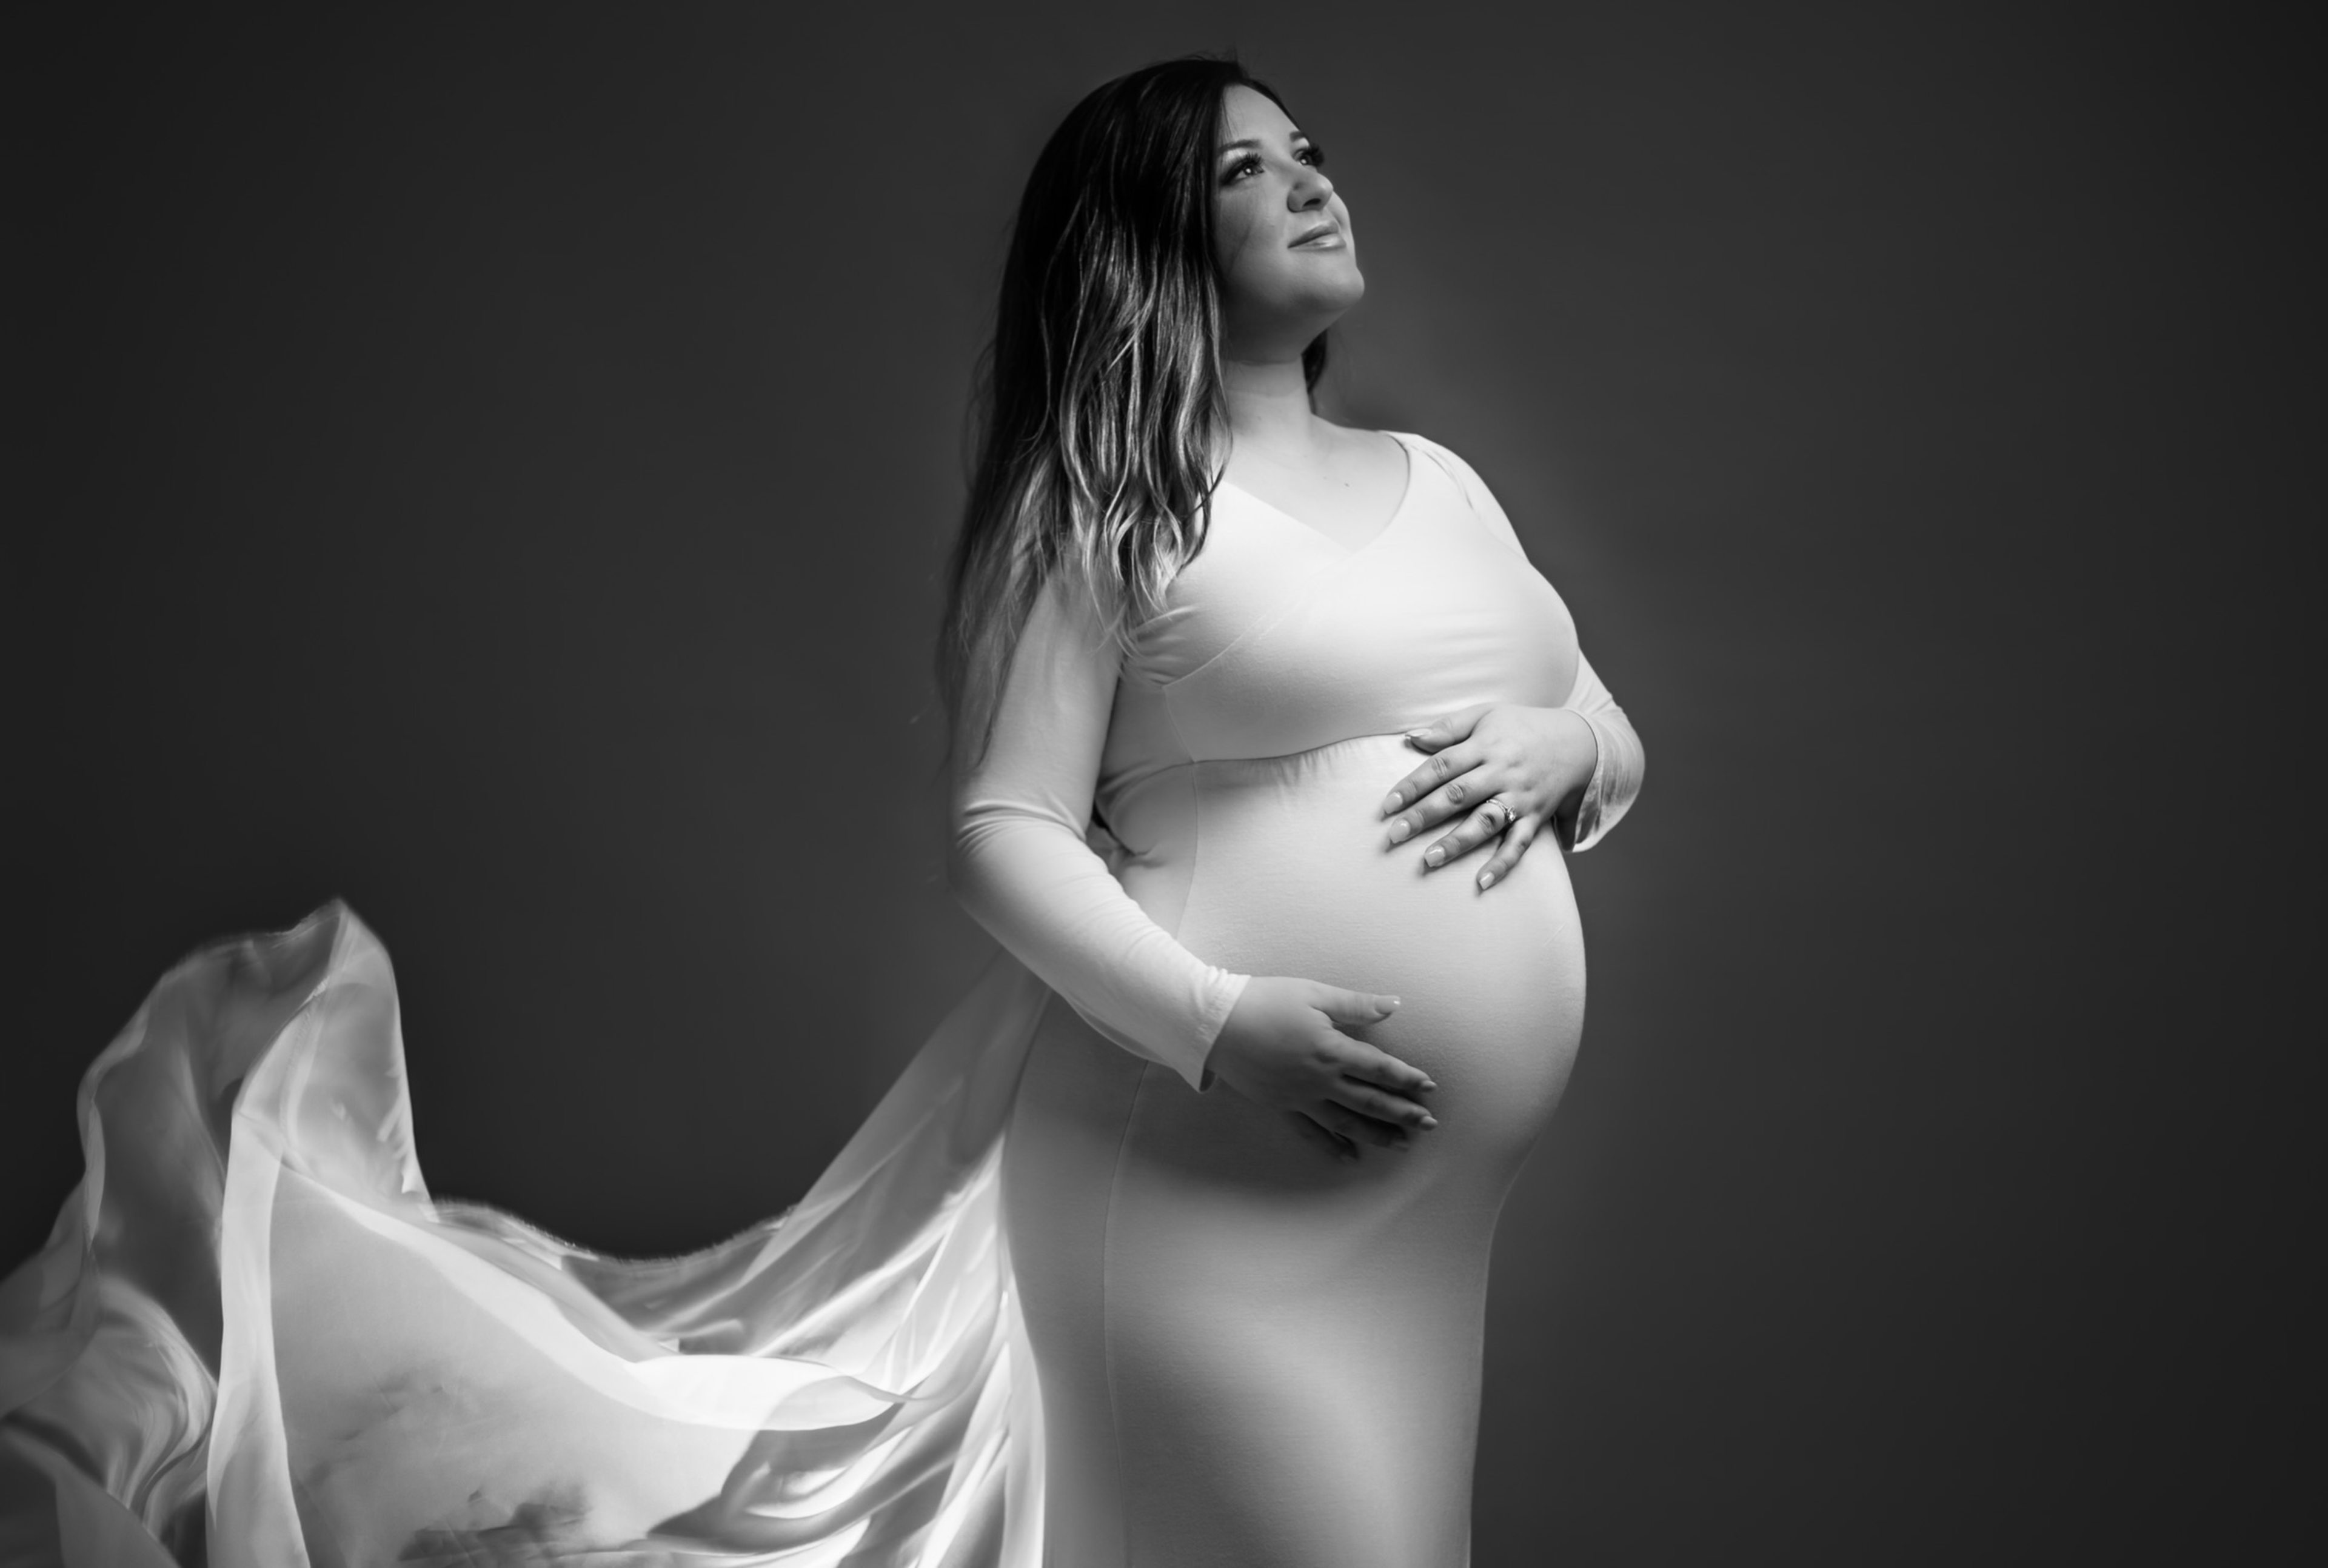 A maternity photoshoot captures a pregnant woman in a white gown in black and white.